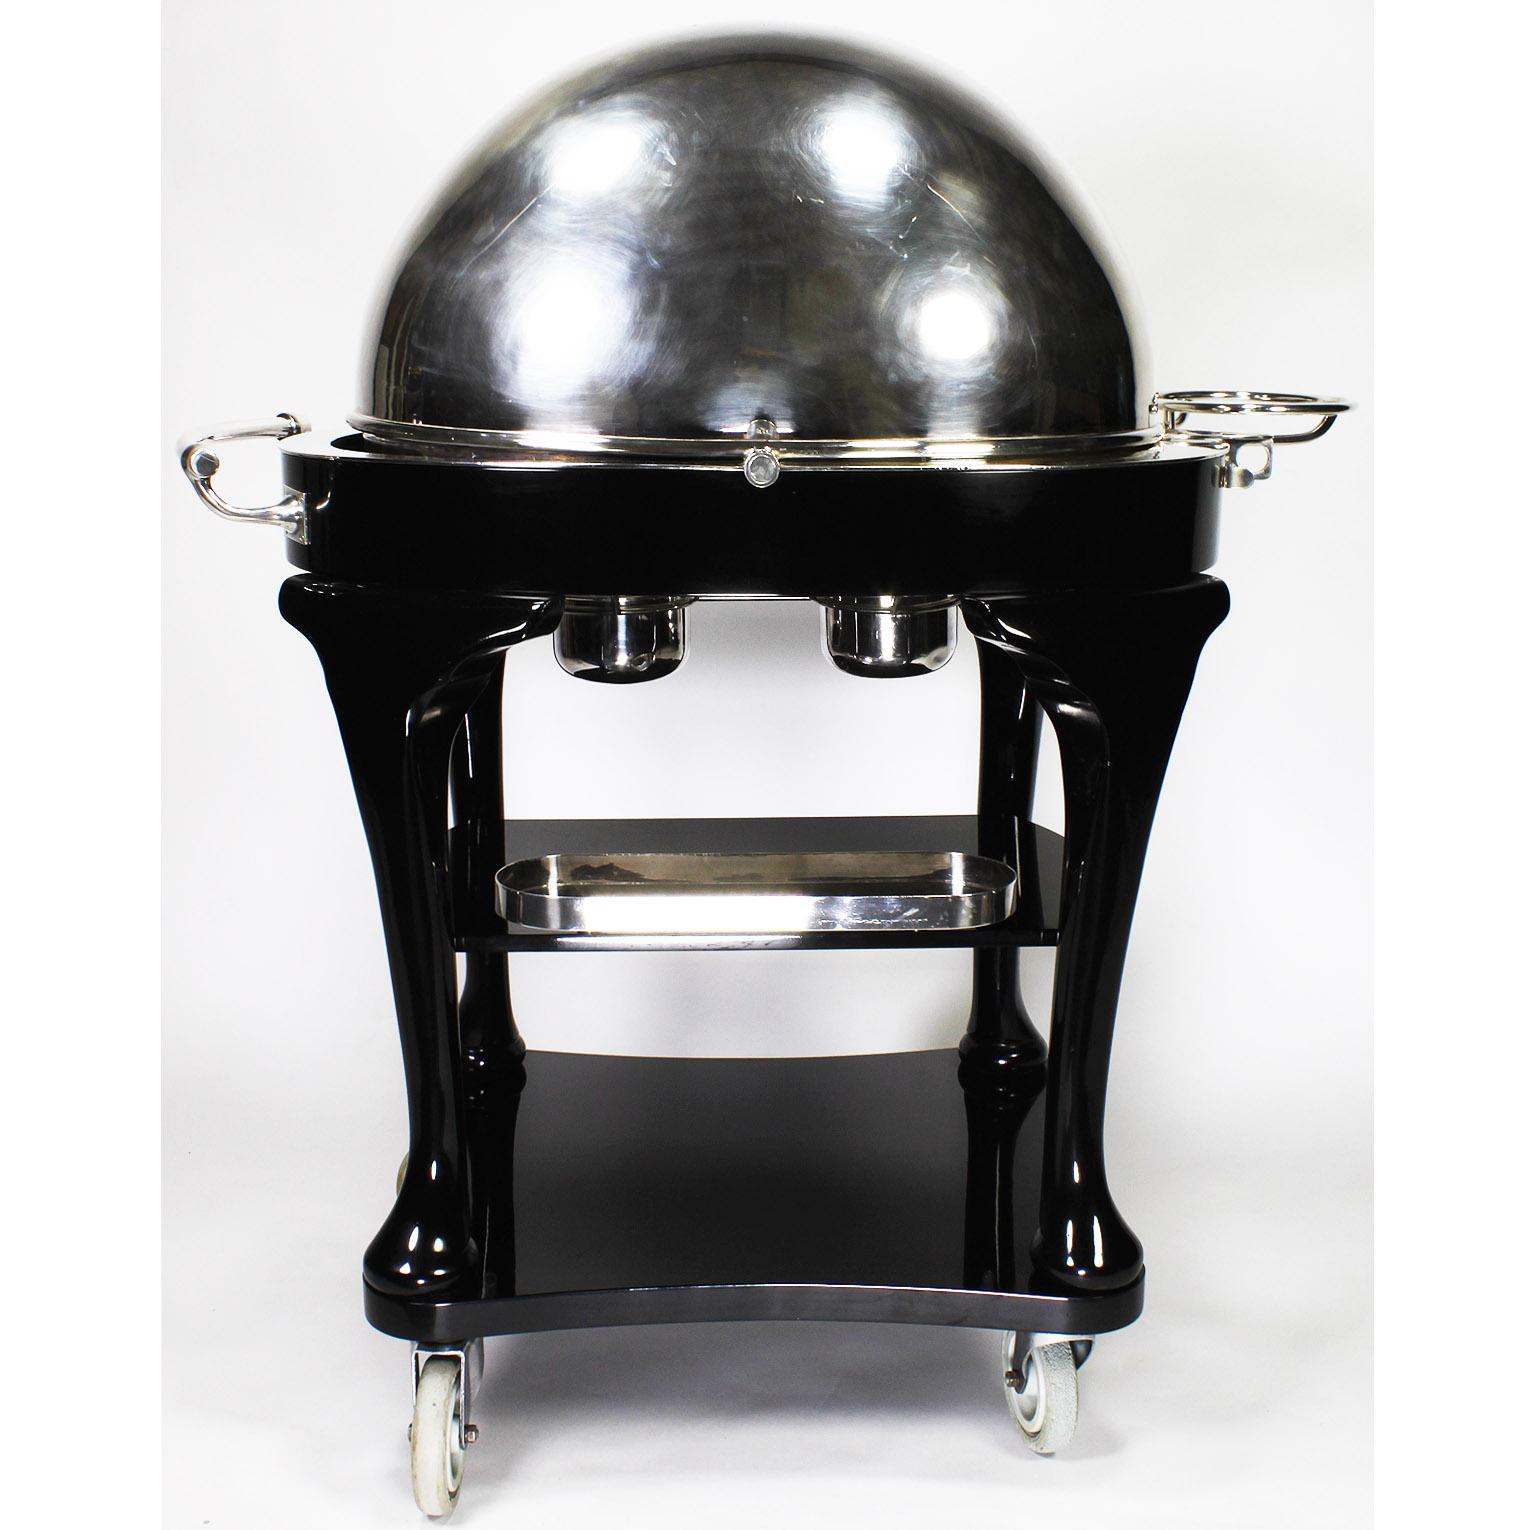 A Fine English 1930s Art Deco Ebonized and Silver Plated Beef/Turkey/Lamb Carving Trolley, by Drakes Silversmiths of Brewer Street, London W1. The elegant silver-plated domed-top cart, surmounted atop a mahogany frame, with a hot-water reservoir and